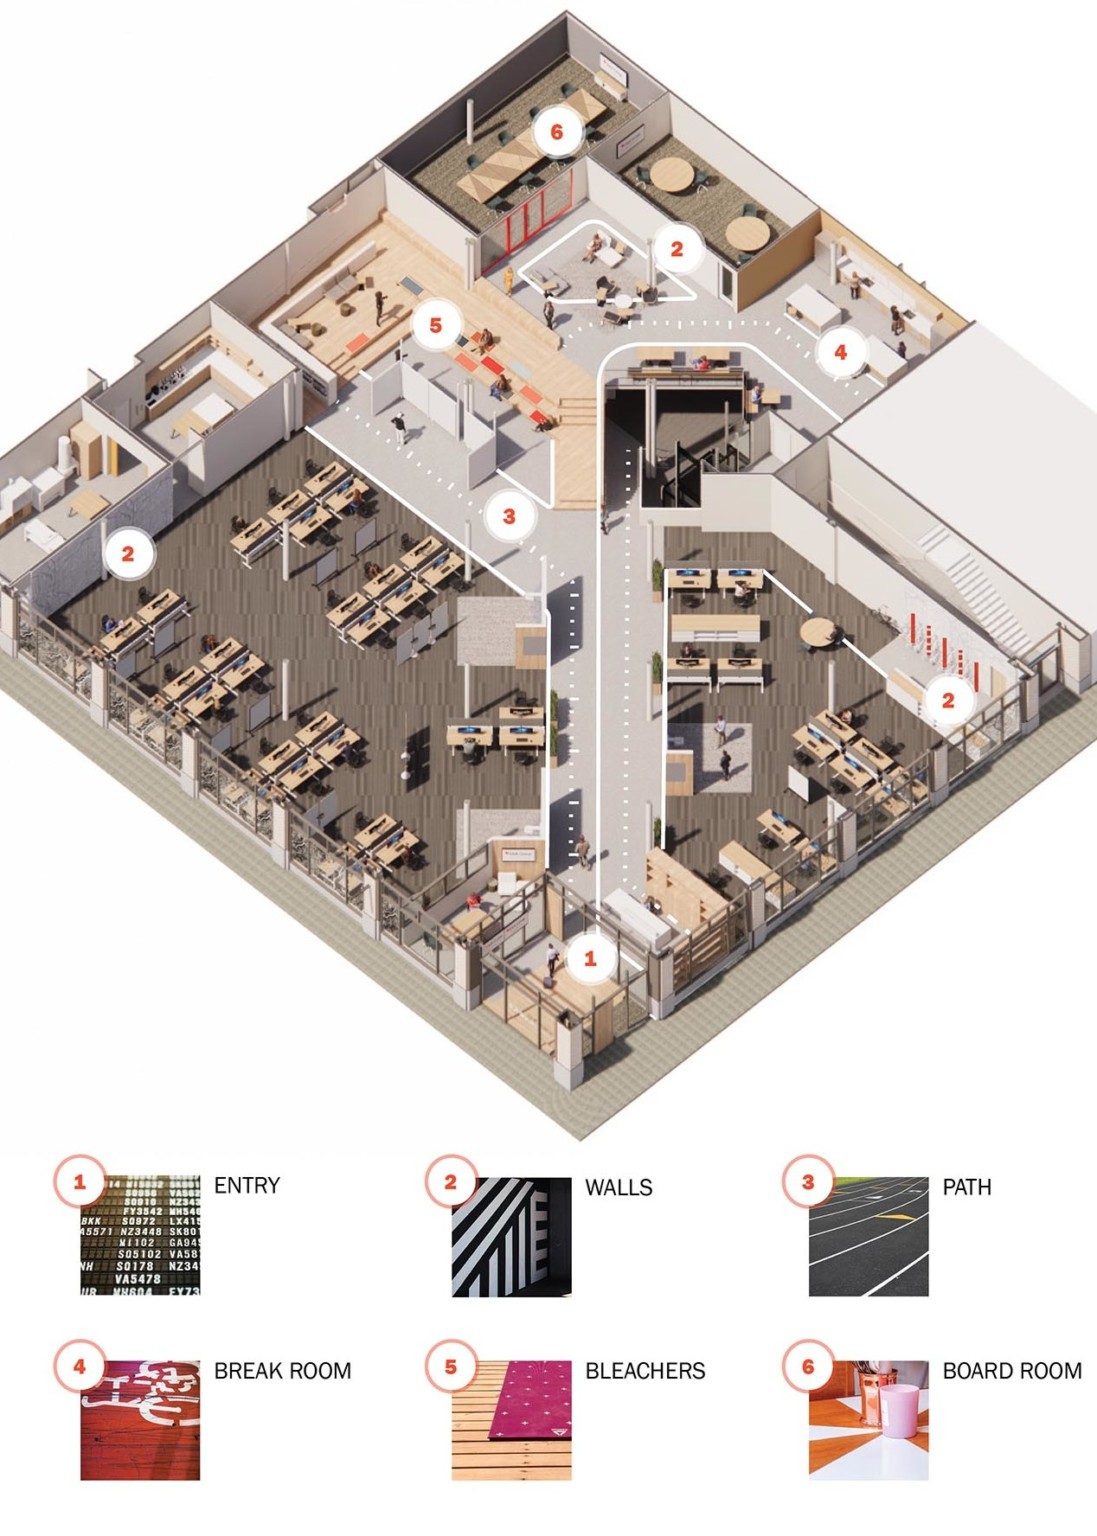 Aerial view rendering looking into layout of office with numbered sections with legend below